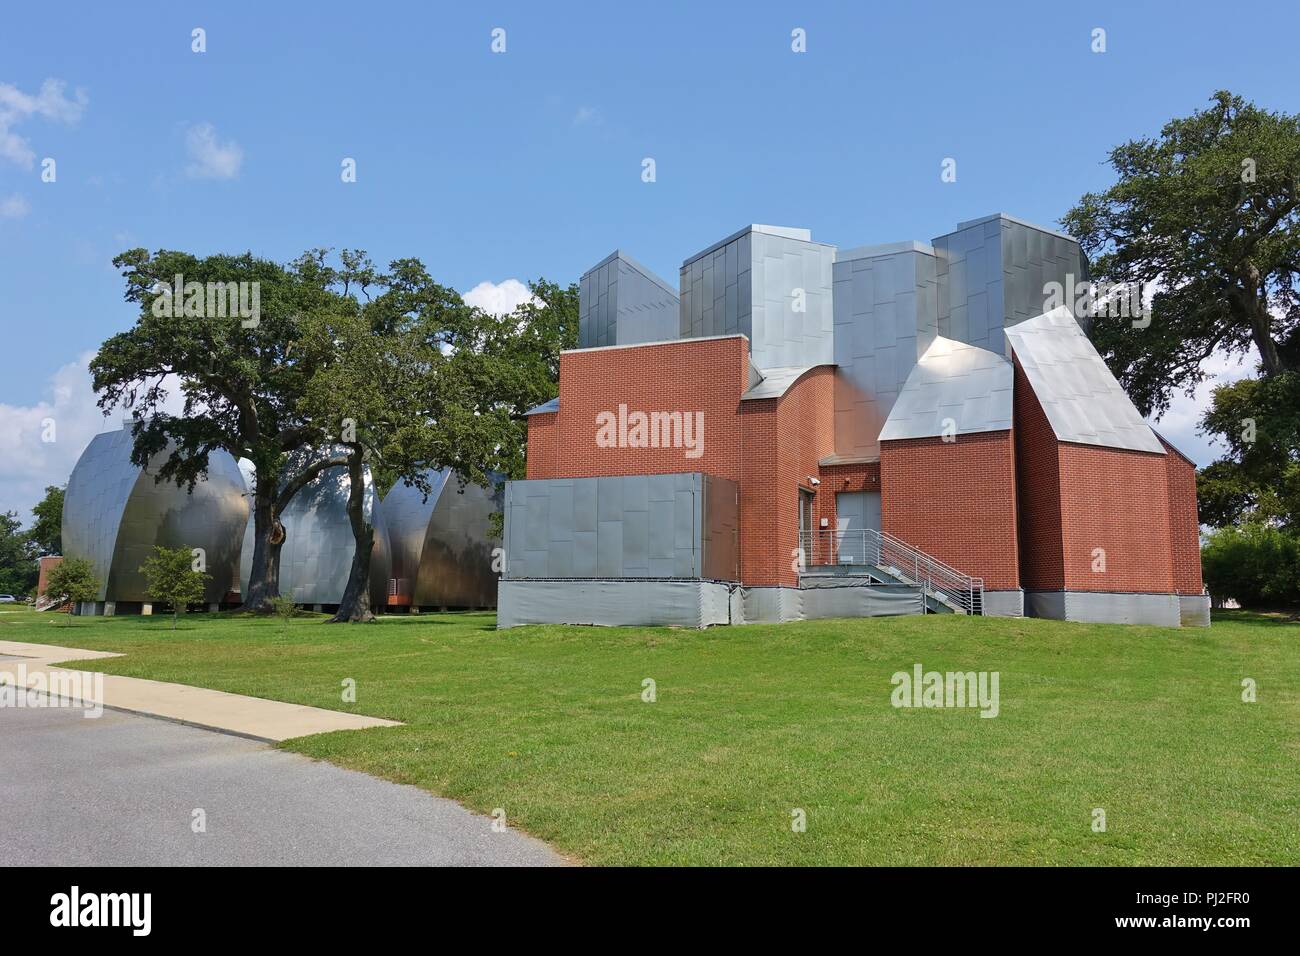 BILOXI, MS - View of the landmark Ohr-O'Keefe Museum Of Art, dedicated to the Mad Potter of Biloxi, in Biloxi, Mississippi. Stock Photo